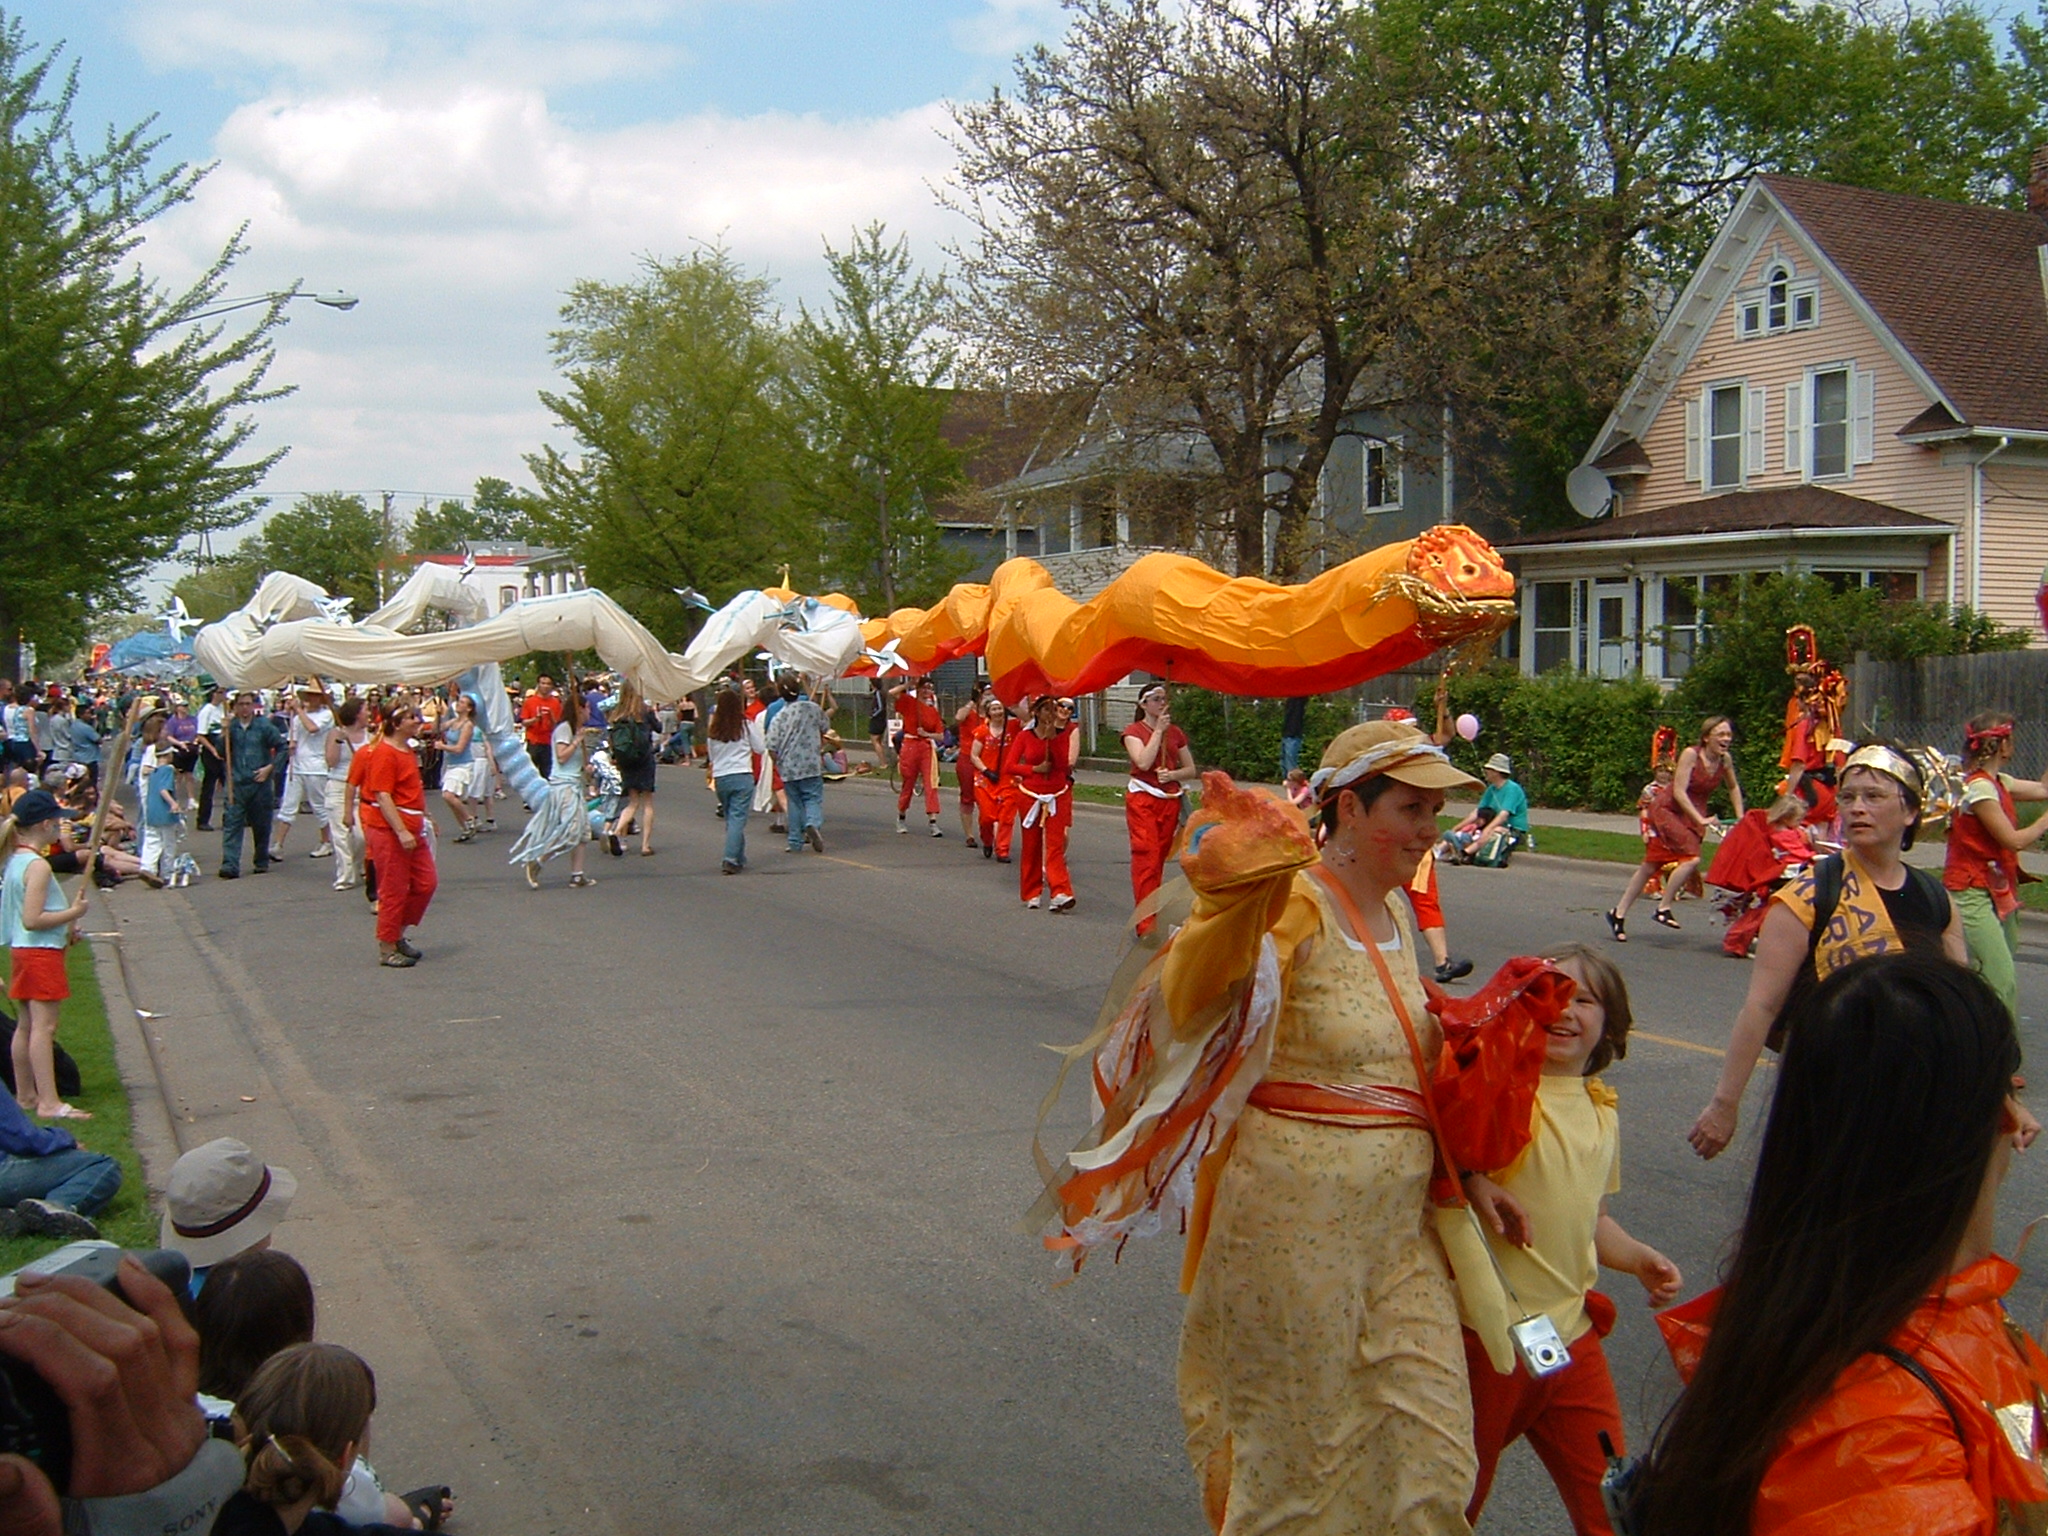 a parade on the street filled with people